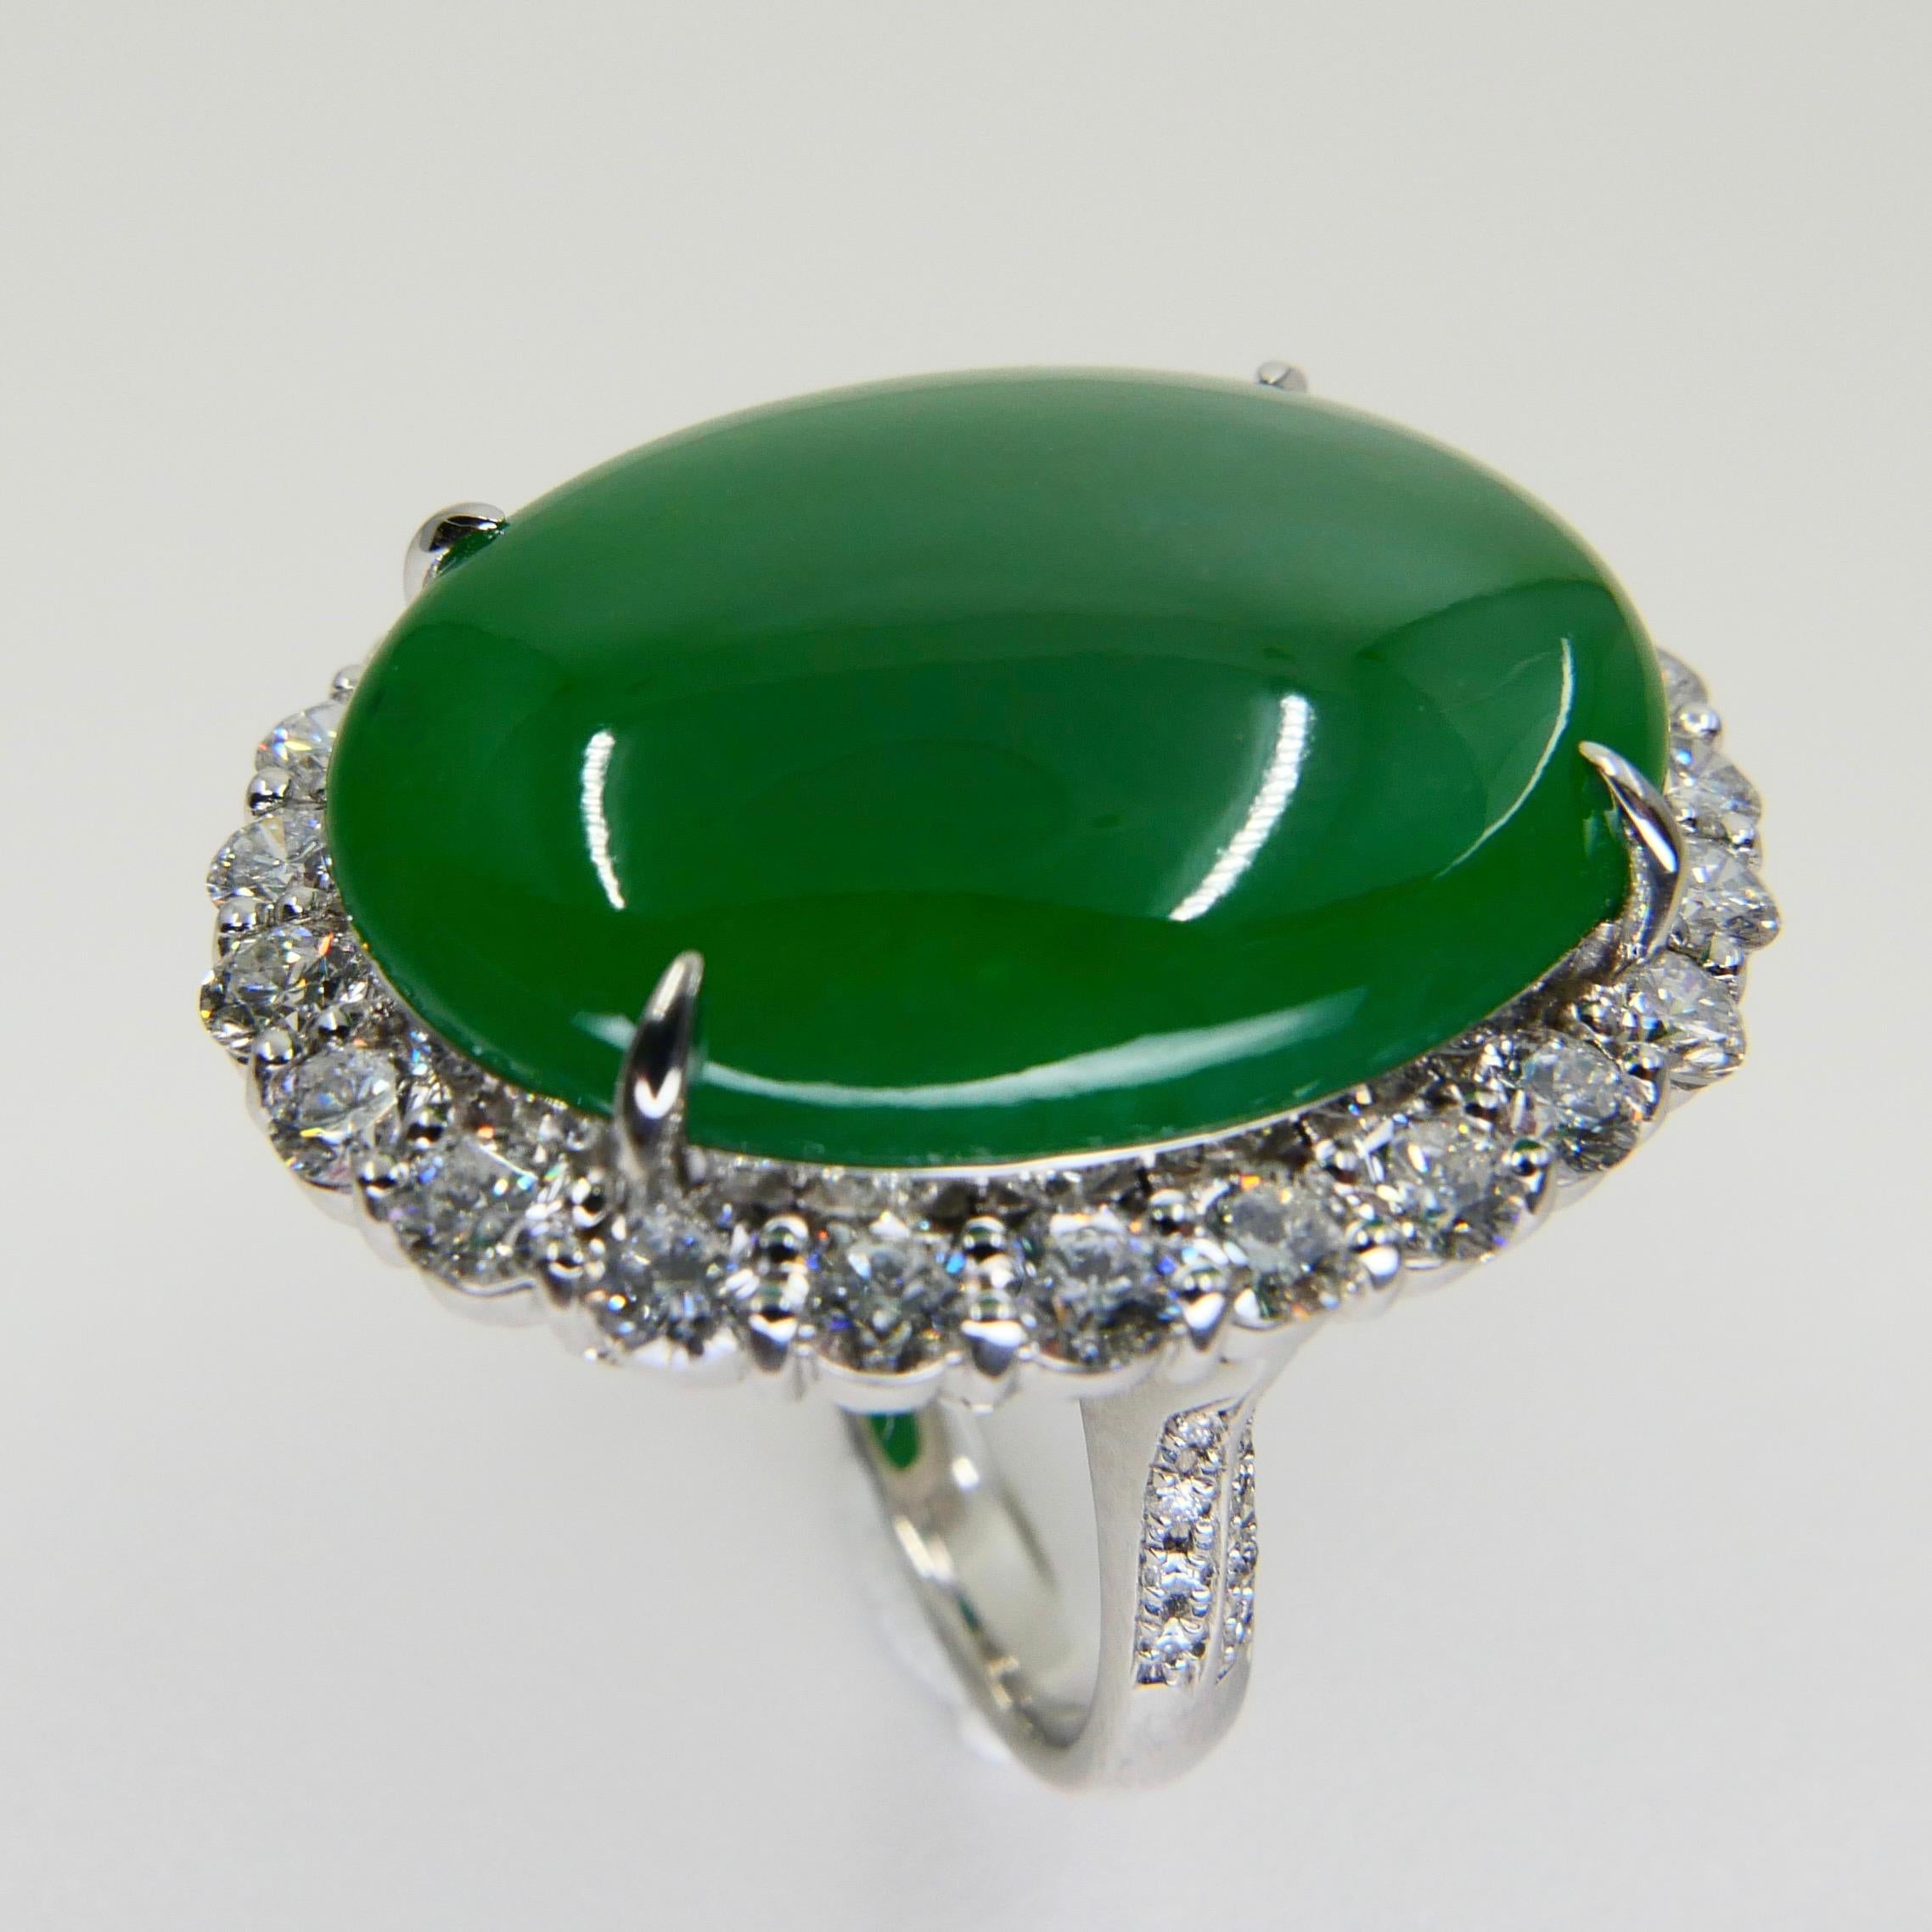 Oval Cut Certified 21 Cts Jade & Diamond Cocktail Ring, Intense Apple Green, Massive